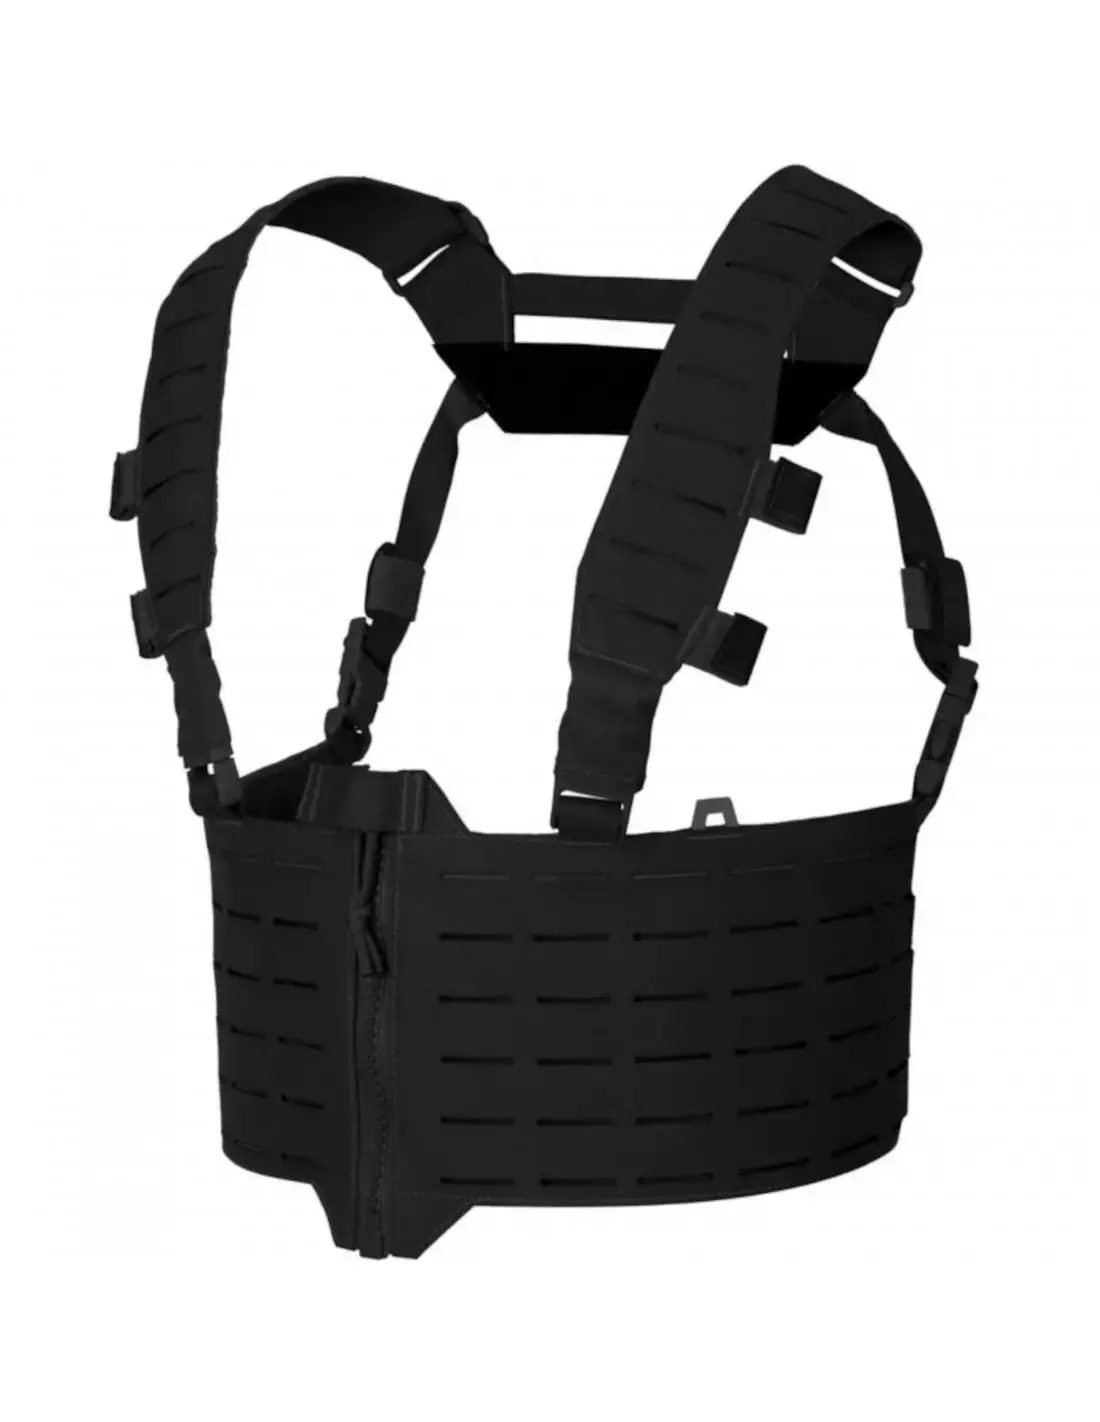 WARWICK Mini Chest Rig® - Direct Action® Advanced Tactical Gear